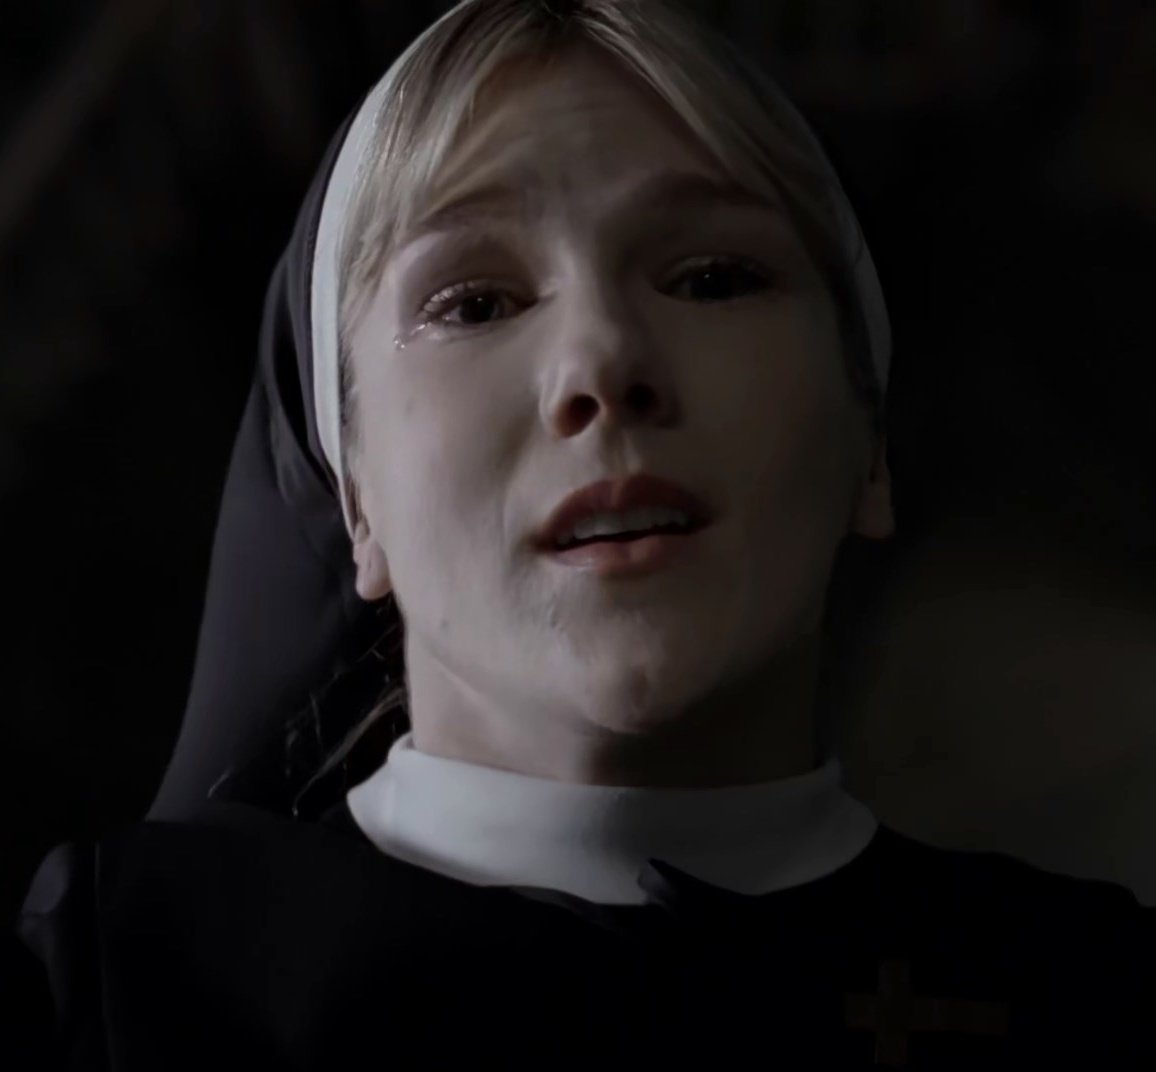 Mary Eunice as Ophelia [Hamlet]Ophelia is seen either as the pinnacle of innocence, a maiden saint, or as a figure of cunning loathsome sin.Through these interpretations, Ophelia’s character expresses the duality of societal perception of women & femininity.